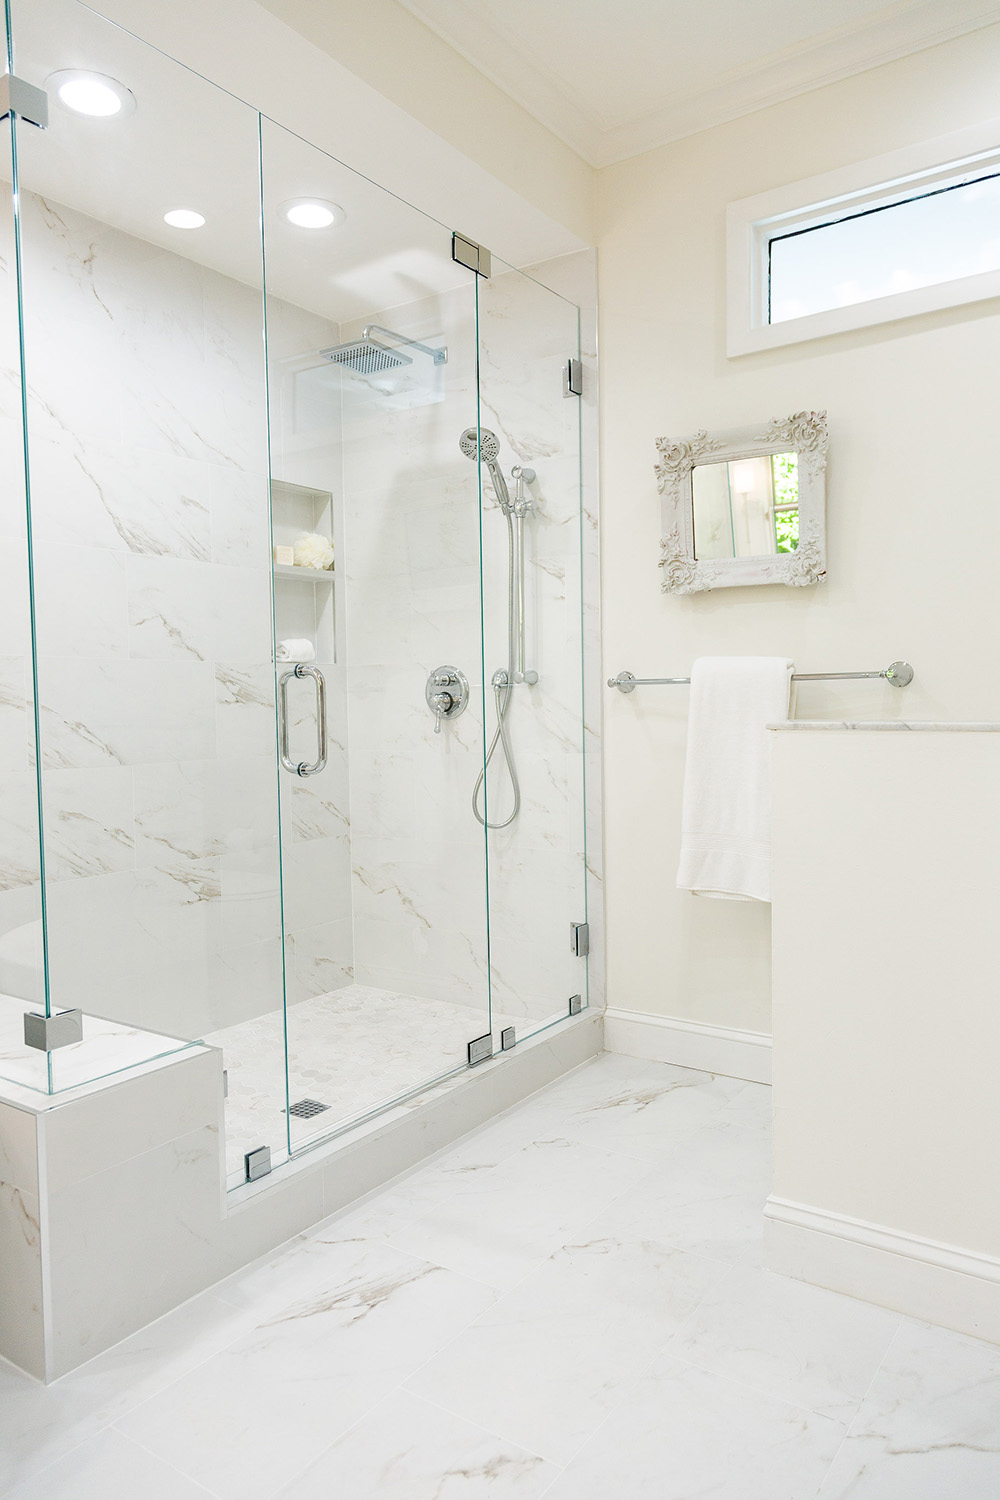 An updated large walk-in shower with large format porcelain tile walls and floors.